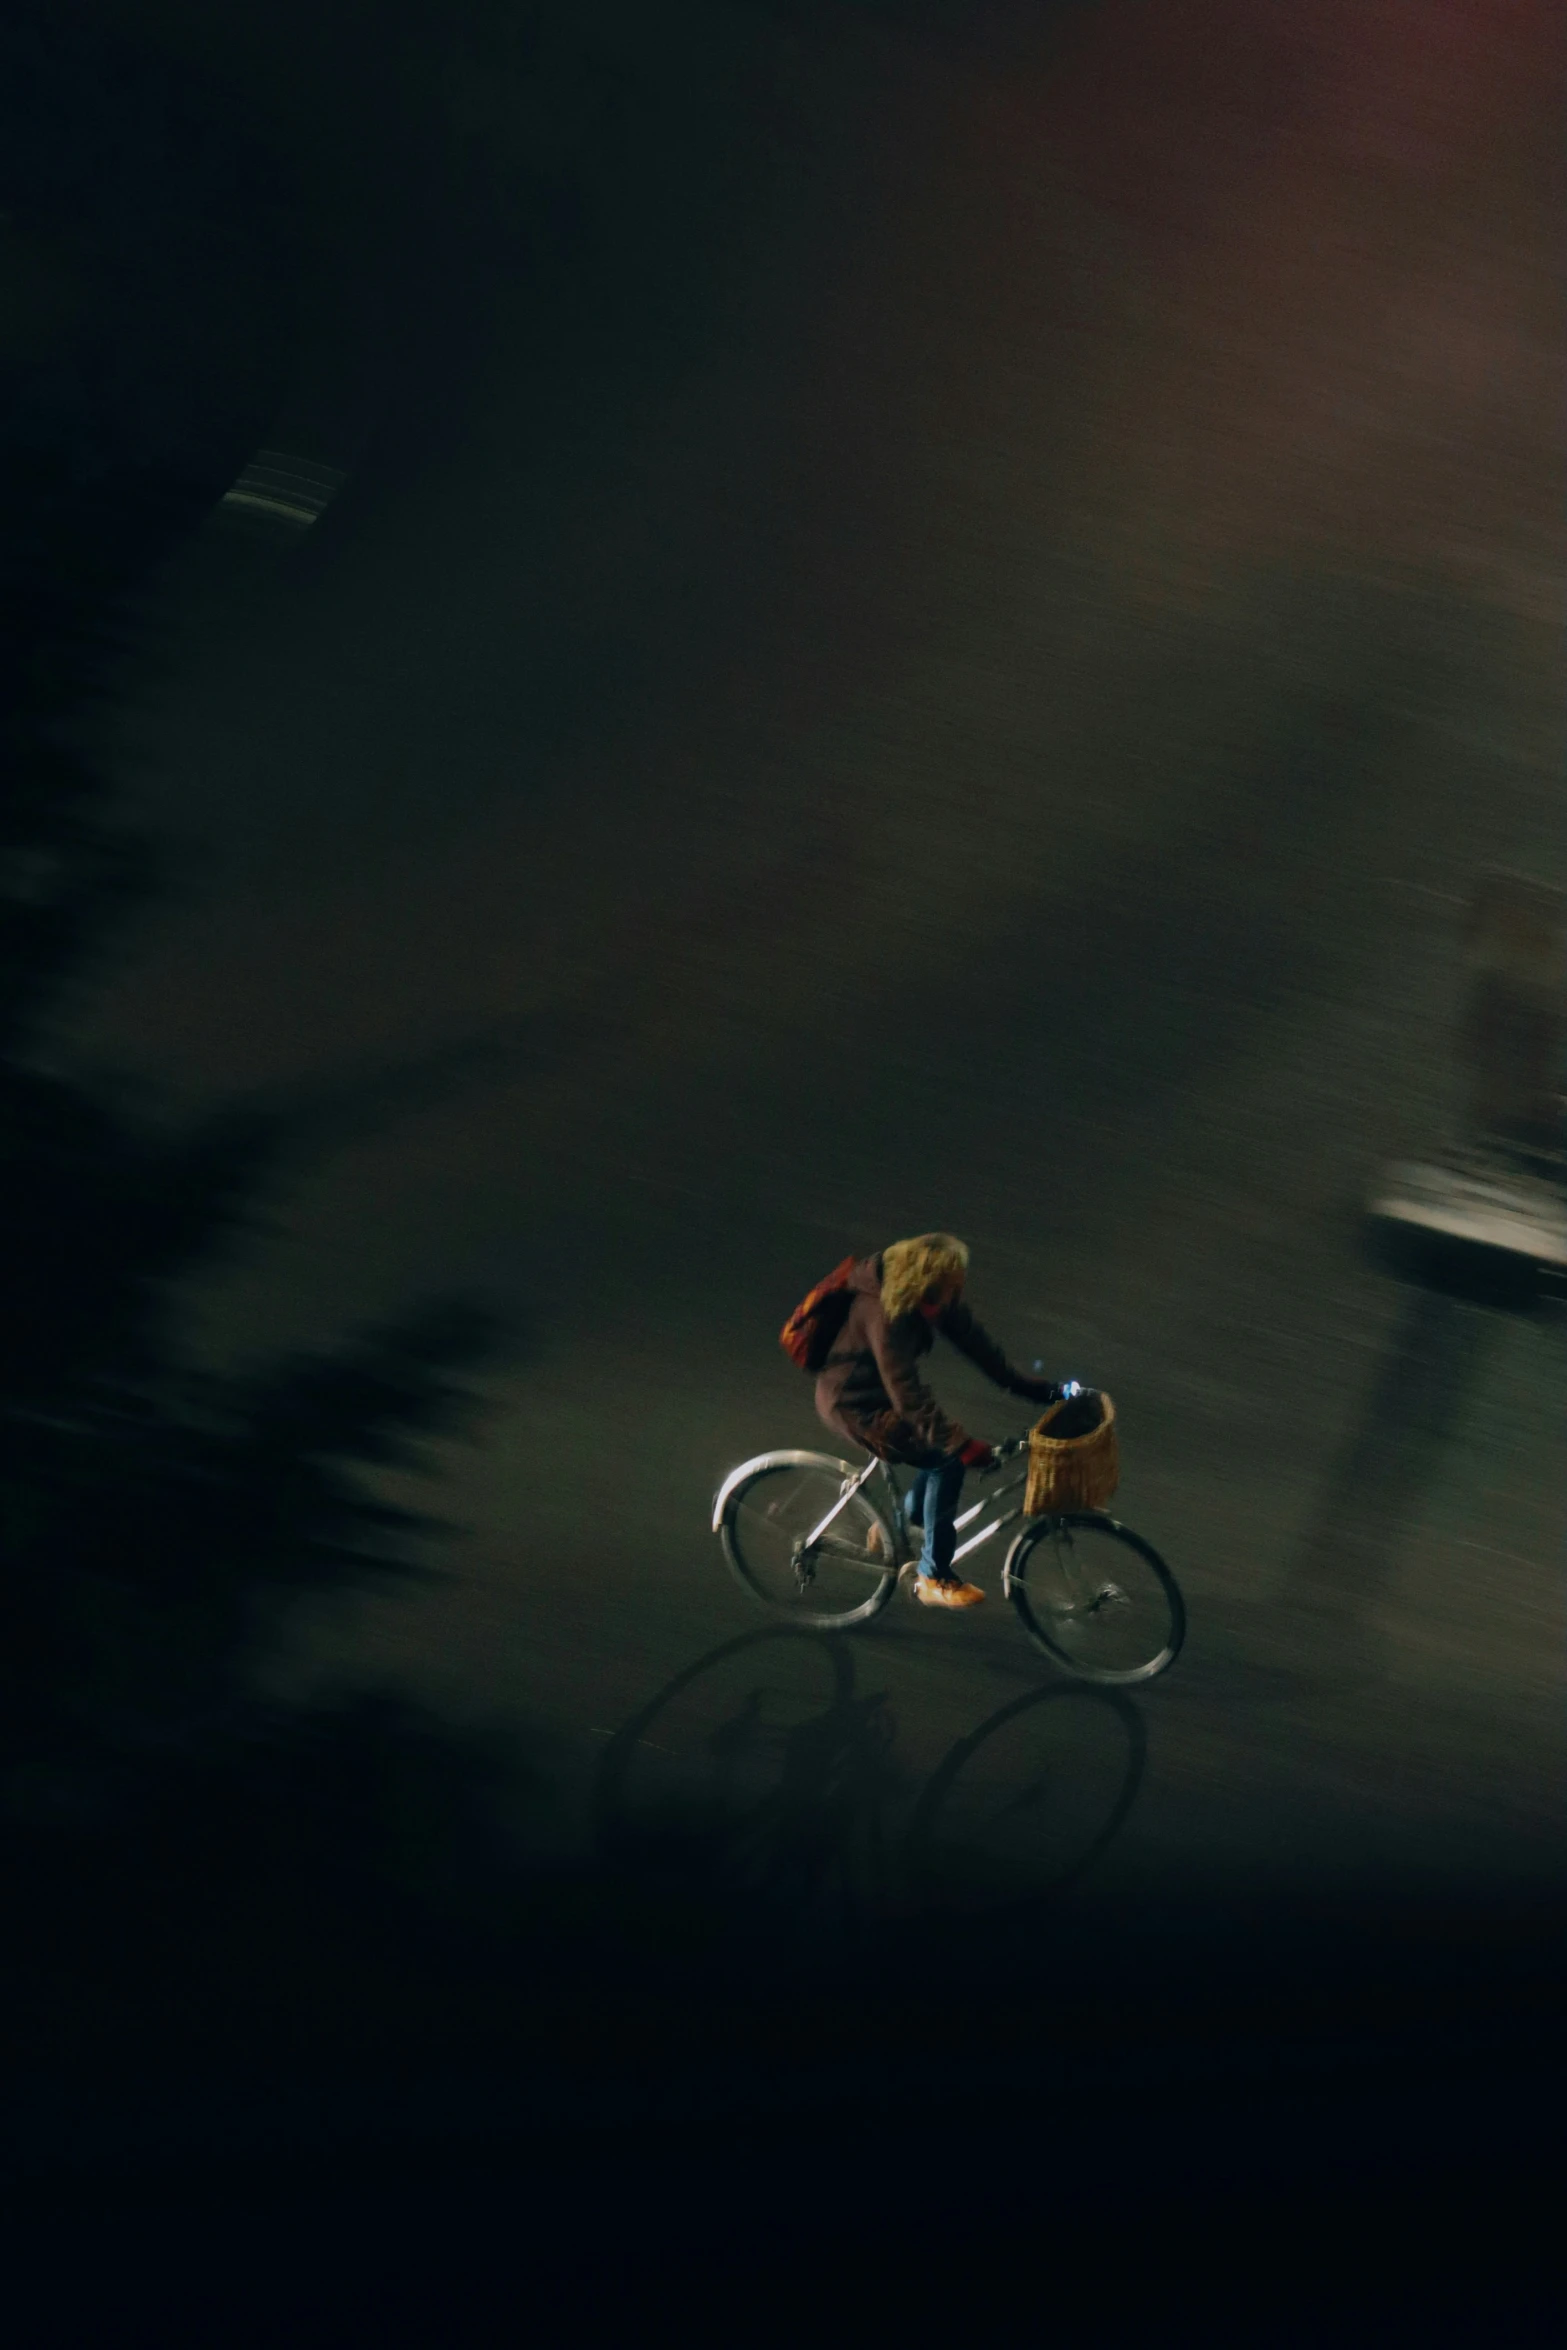 an aerial view of a person riding on a bicycle at night